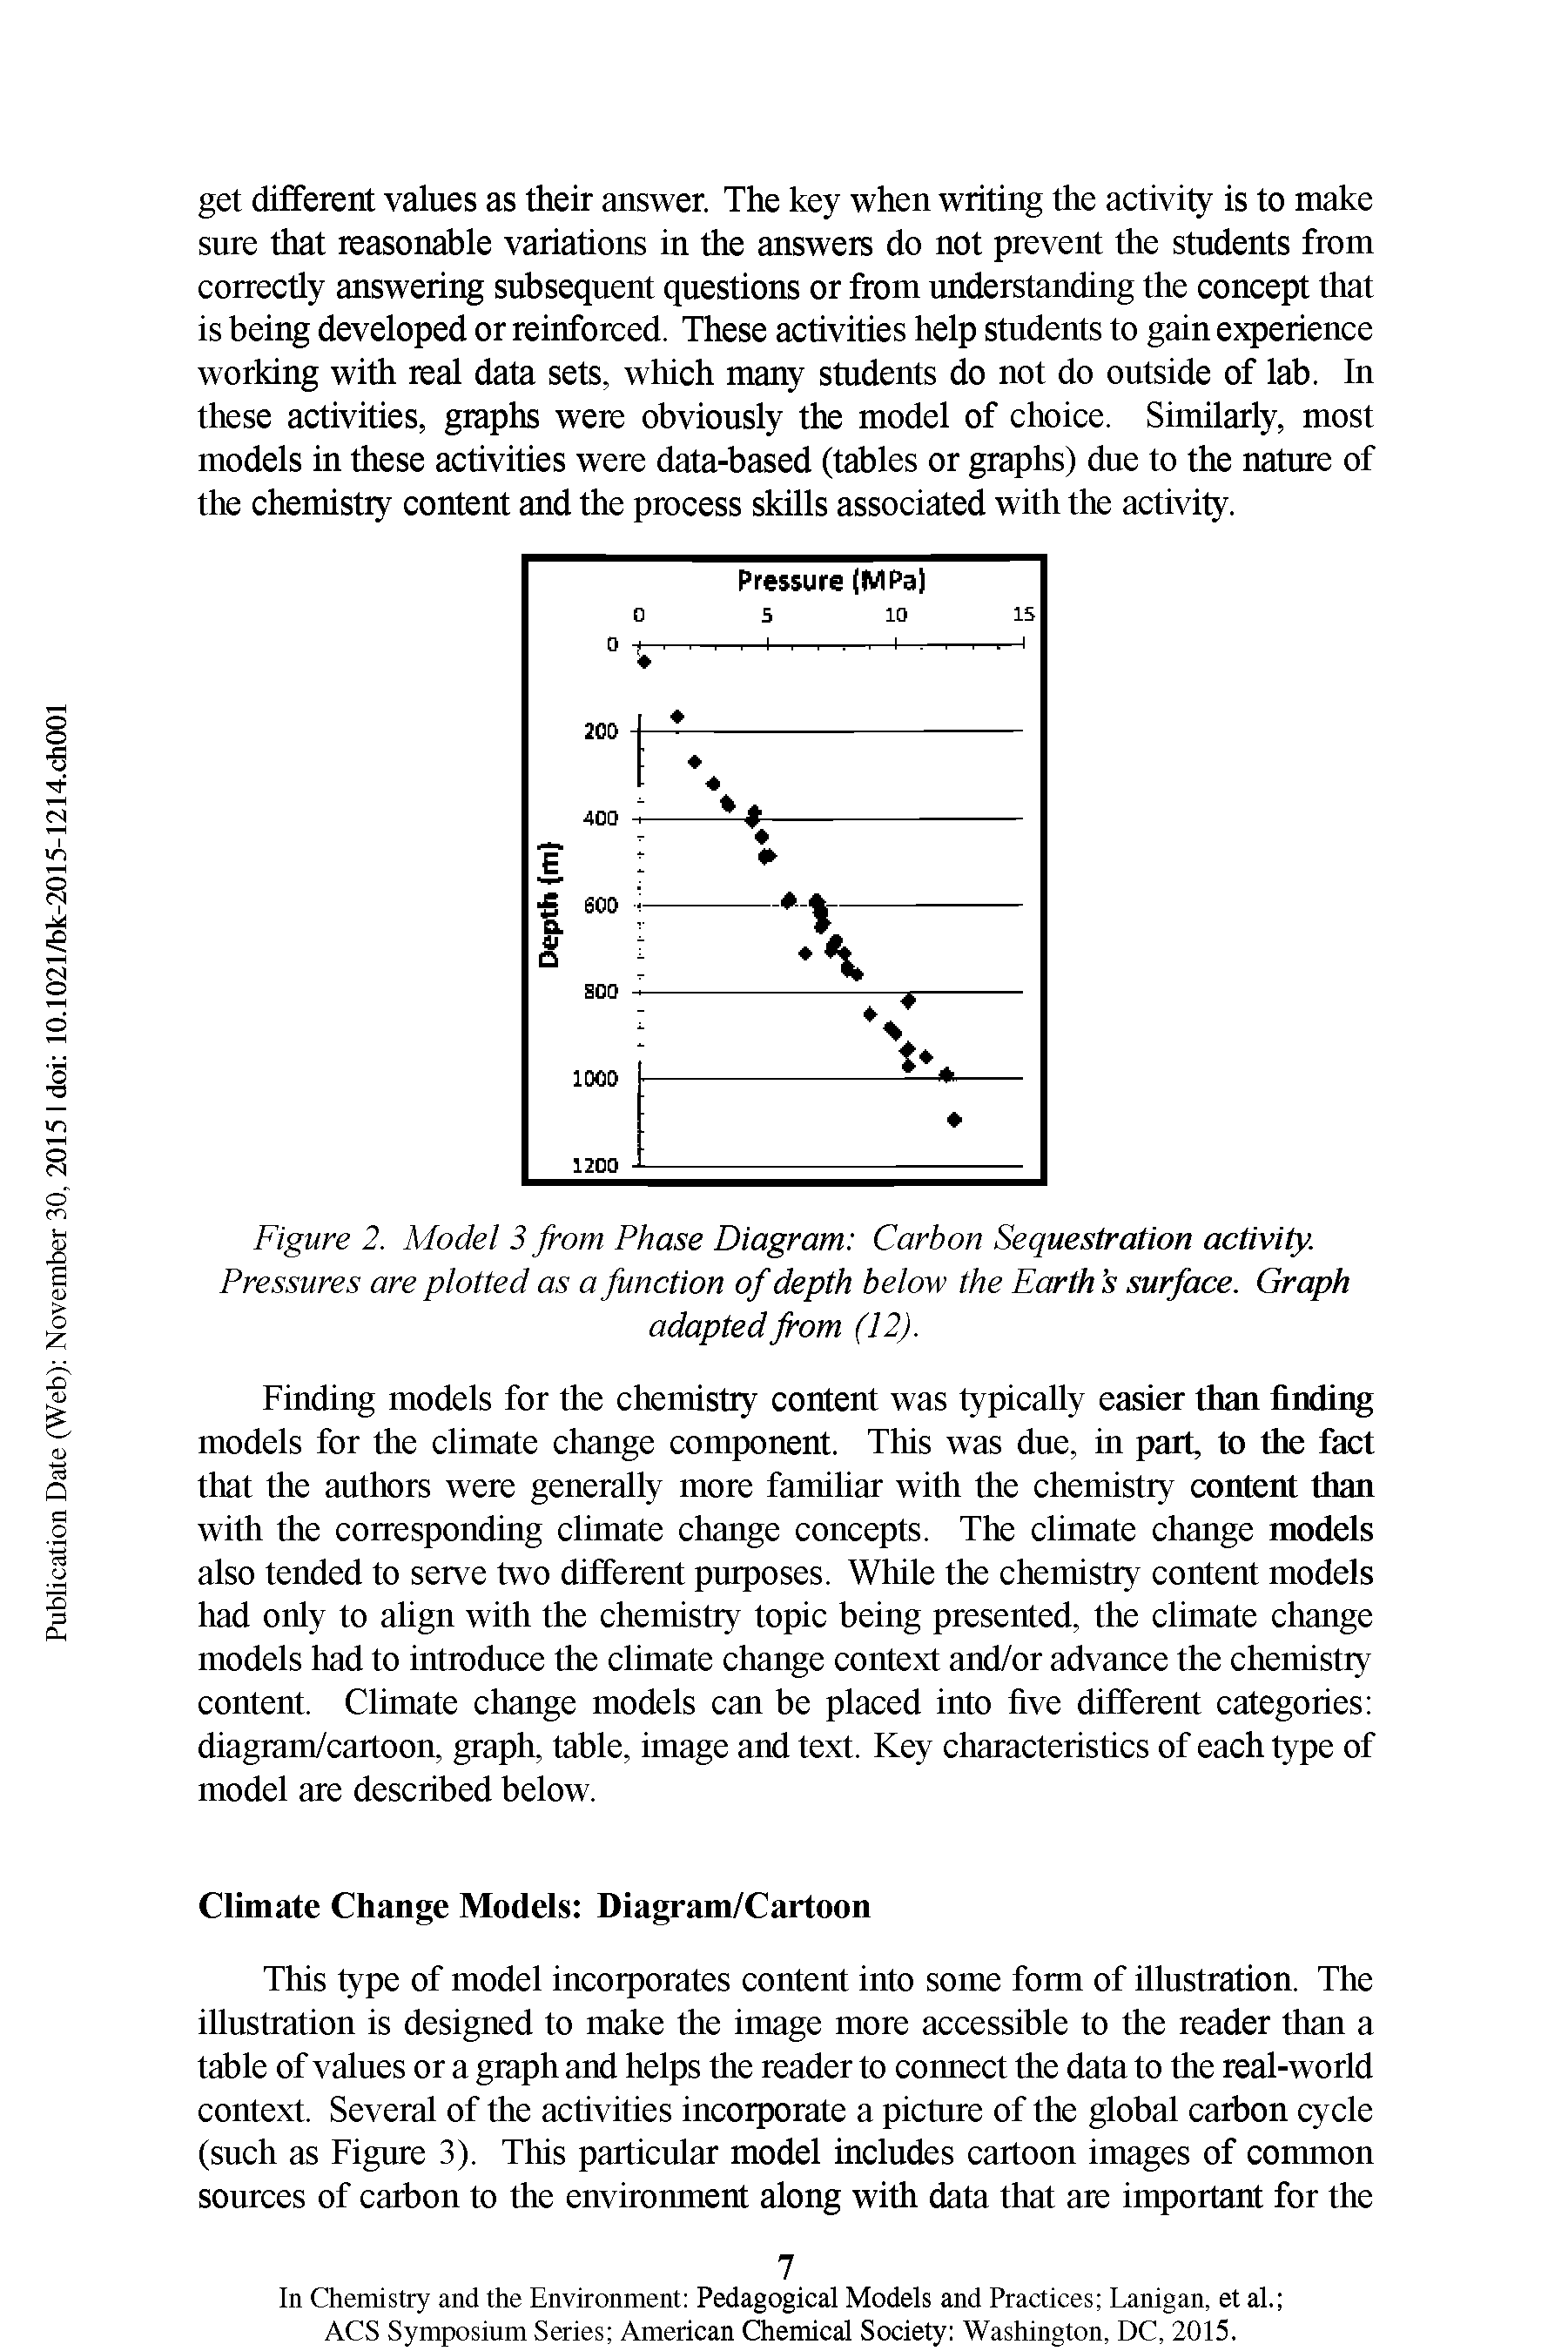 Figure 2. Model 3 from Phase Diagram Carbon Sequestration activity.